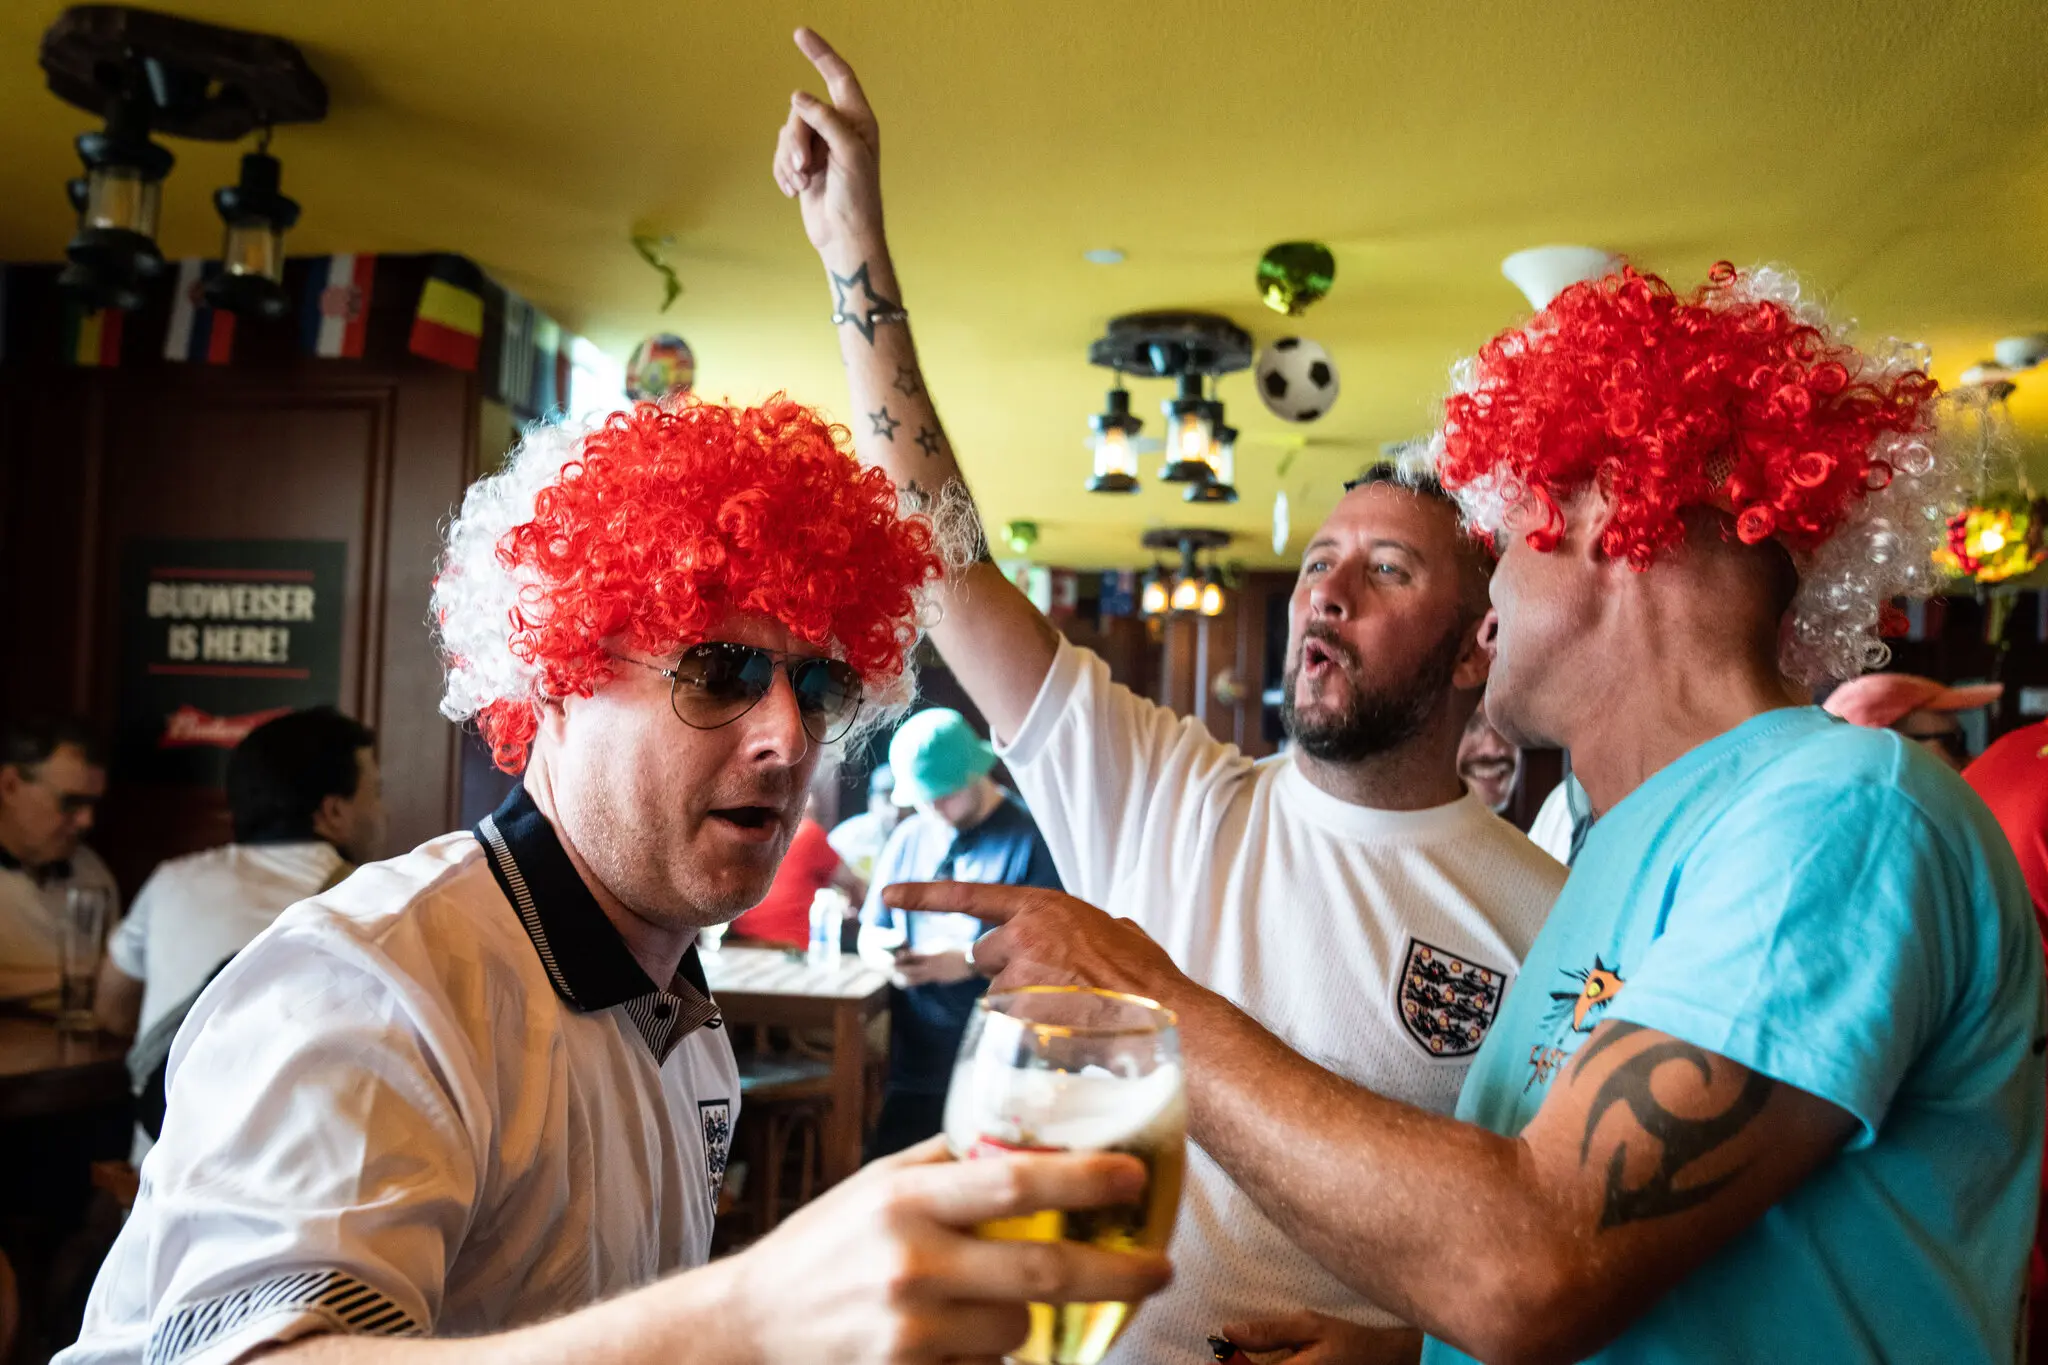 Beer and football are frequent companions, but never more than when it comes to the English (photos: Erin Schaff /New York Times)